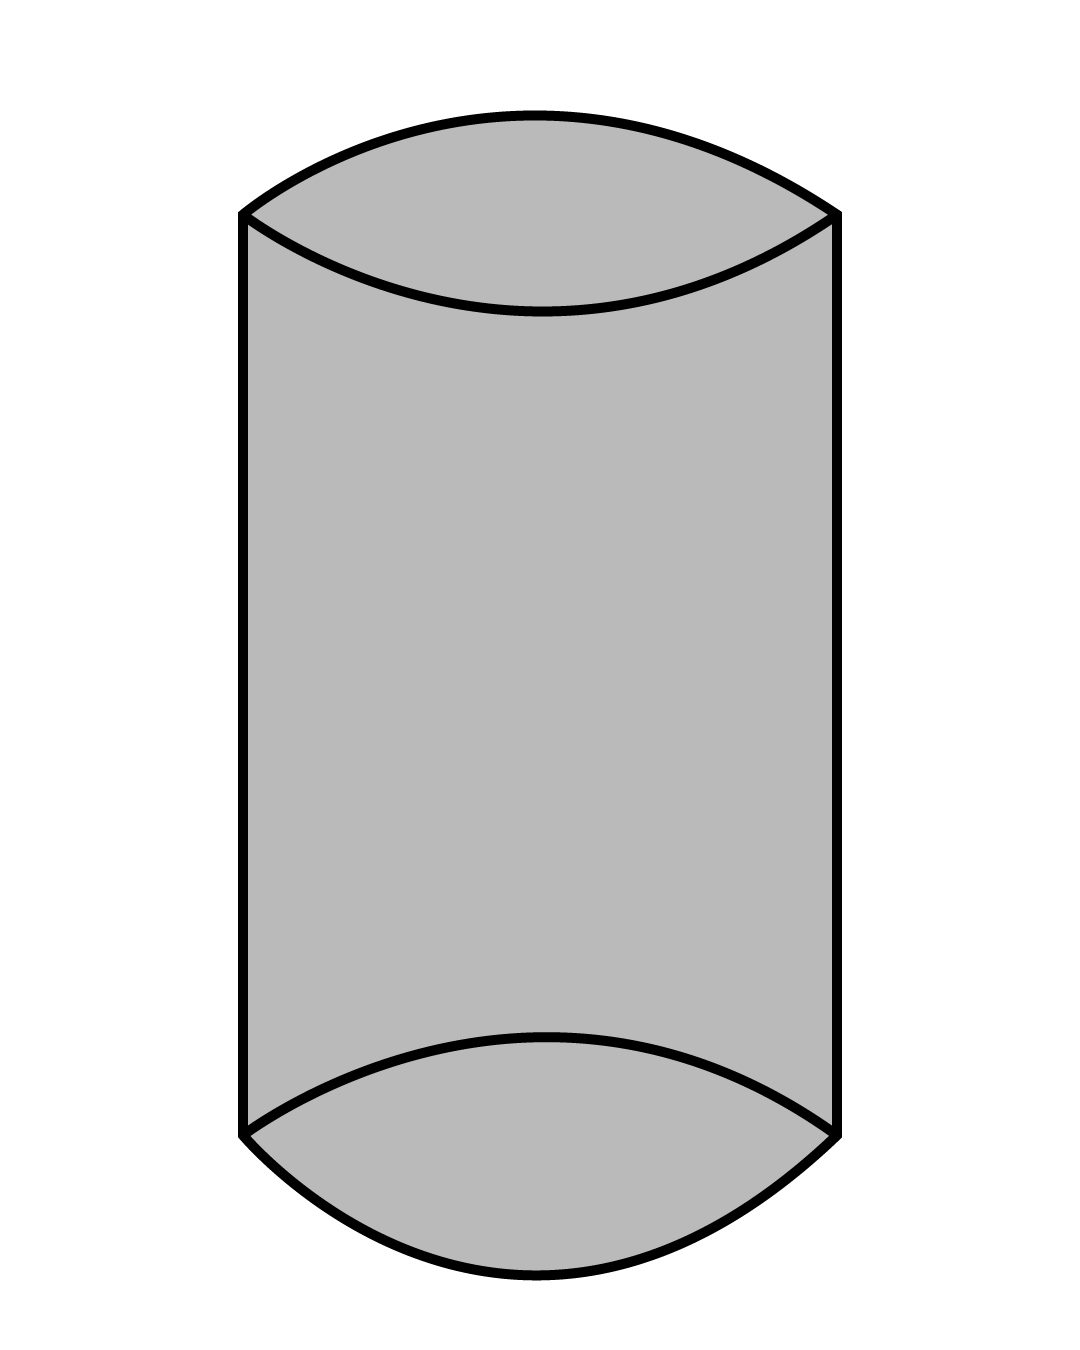 How to Draw cylinder in Easy step by step guide for kids